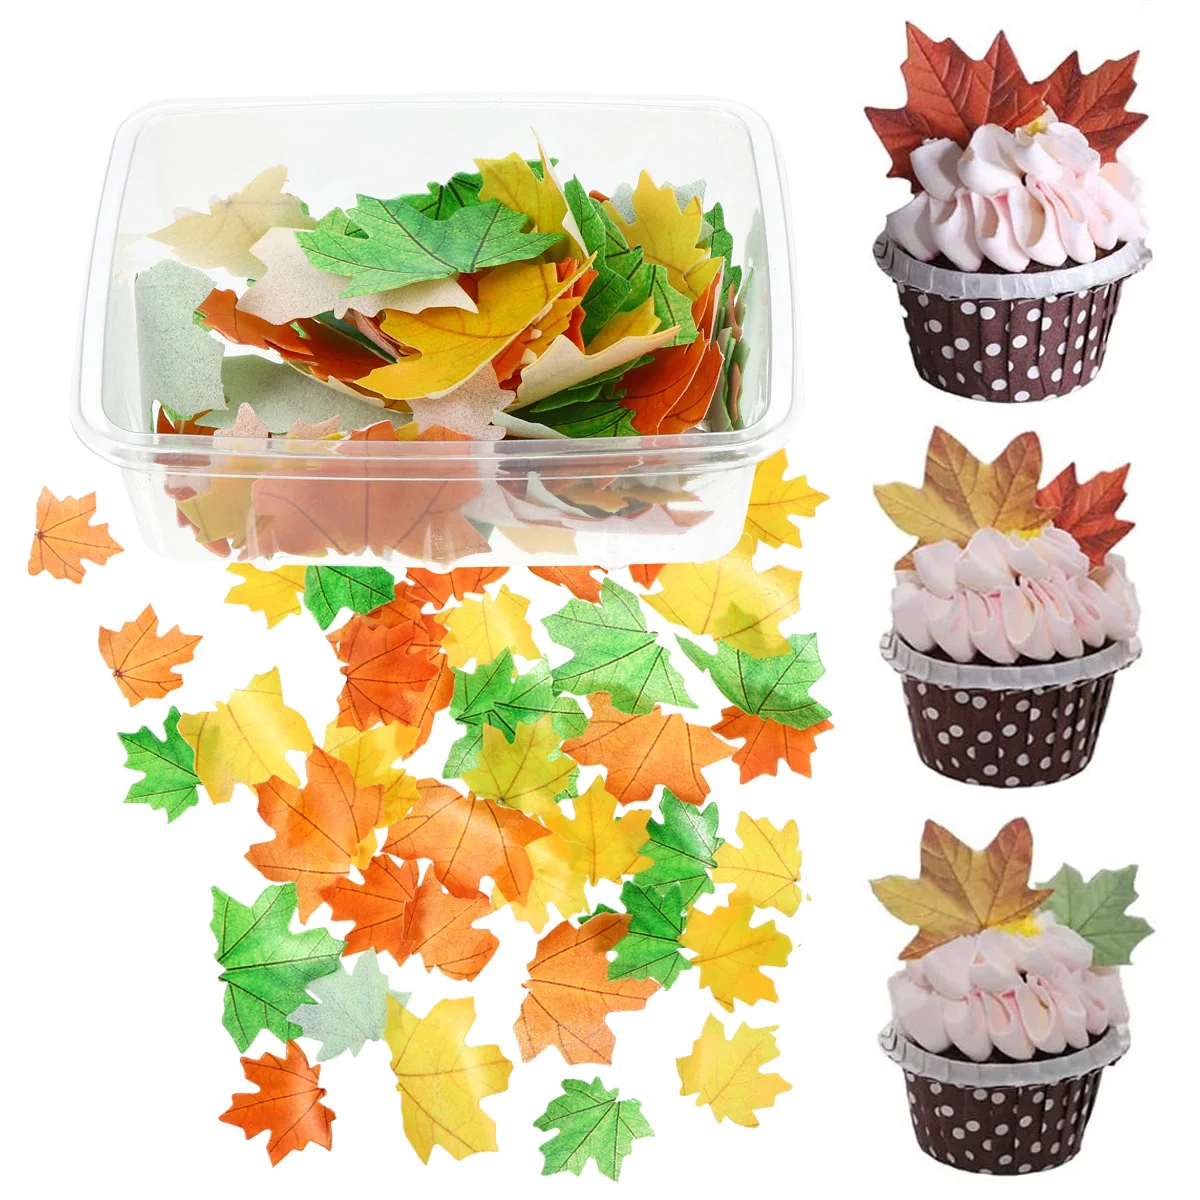 

Fall Edible Cake Leaves Cupcake Decorations Toppers Topper Decorating Leaf Maple Thanksgiving Paper Decoration Cupcakes Autumn